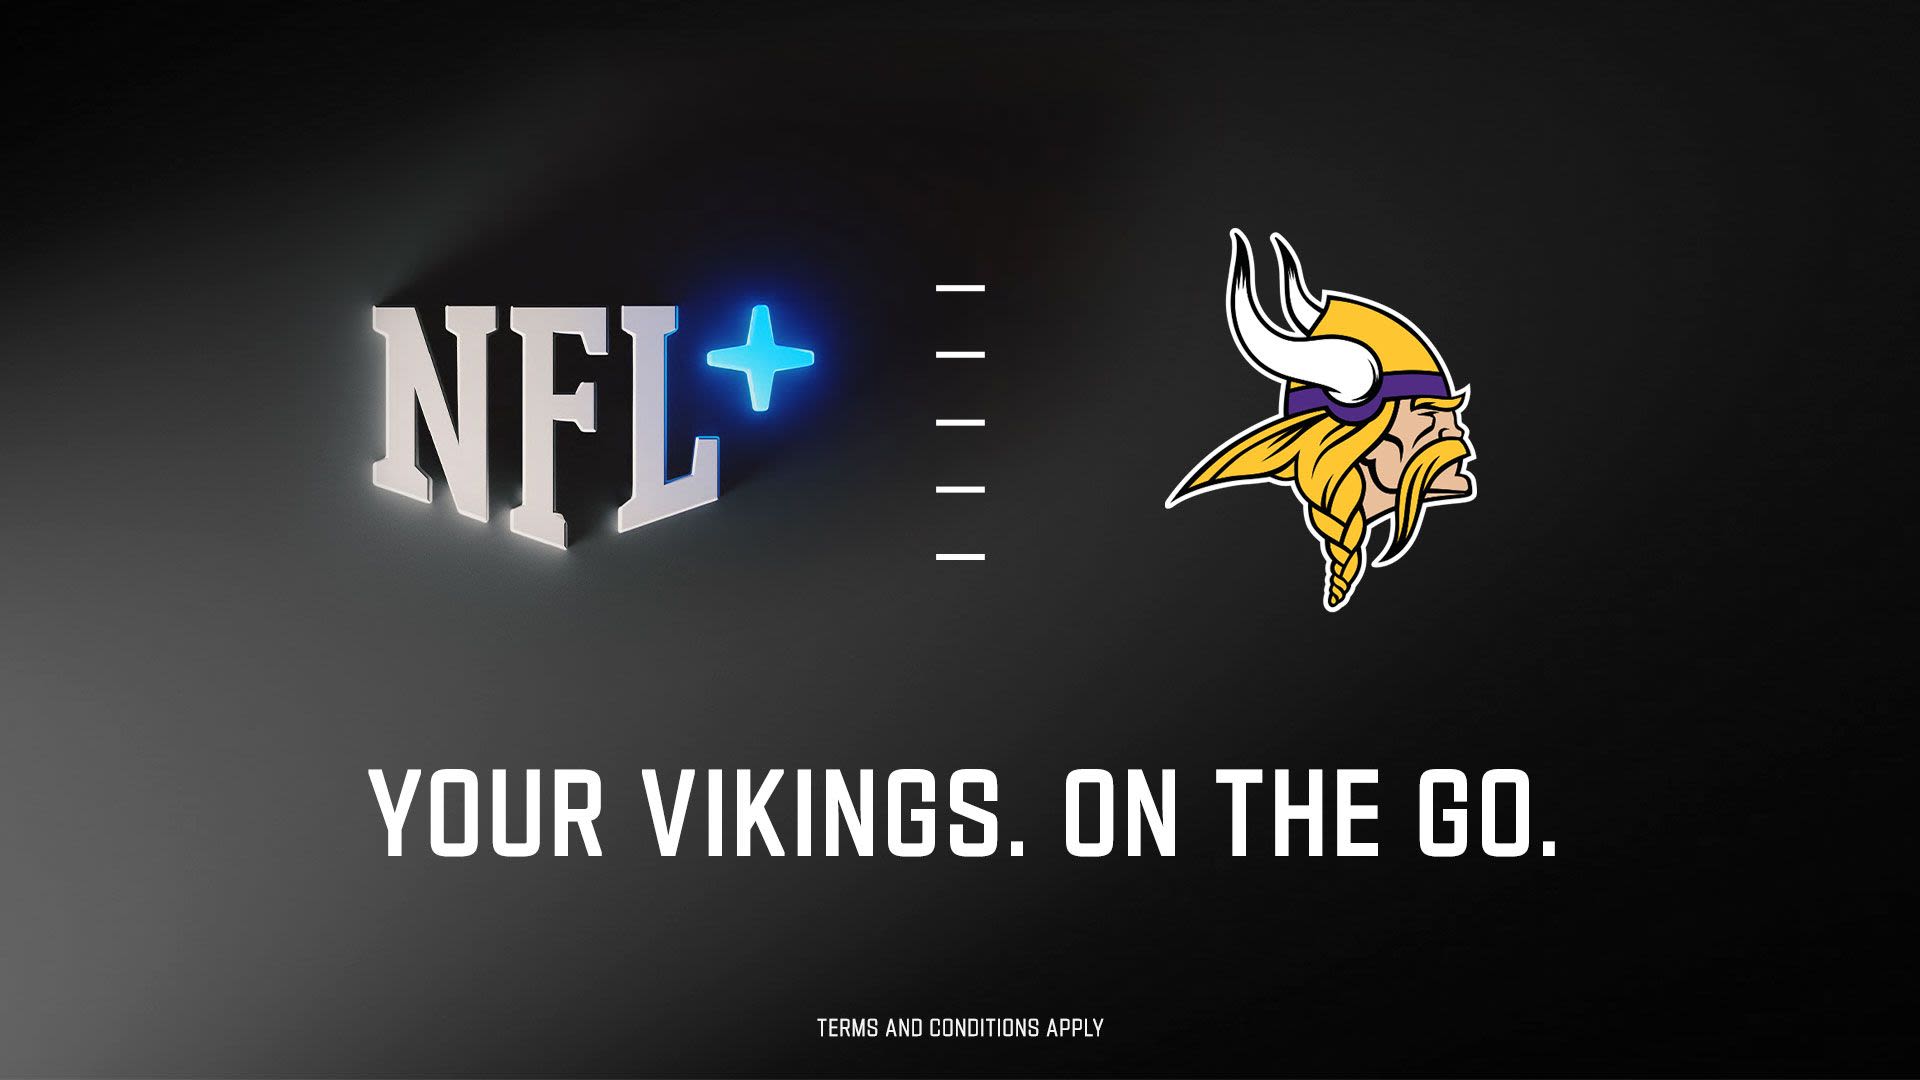 can i watch vikings game today